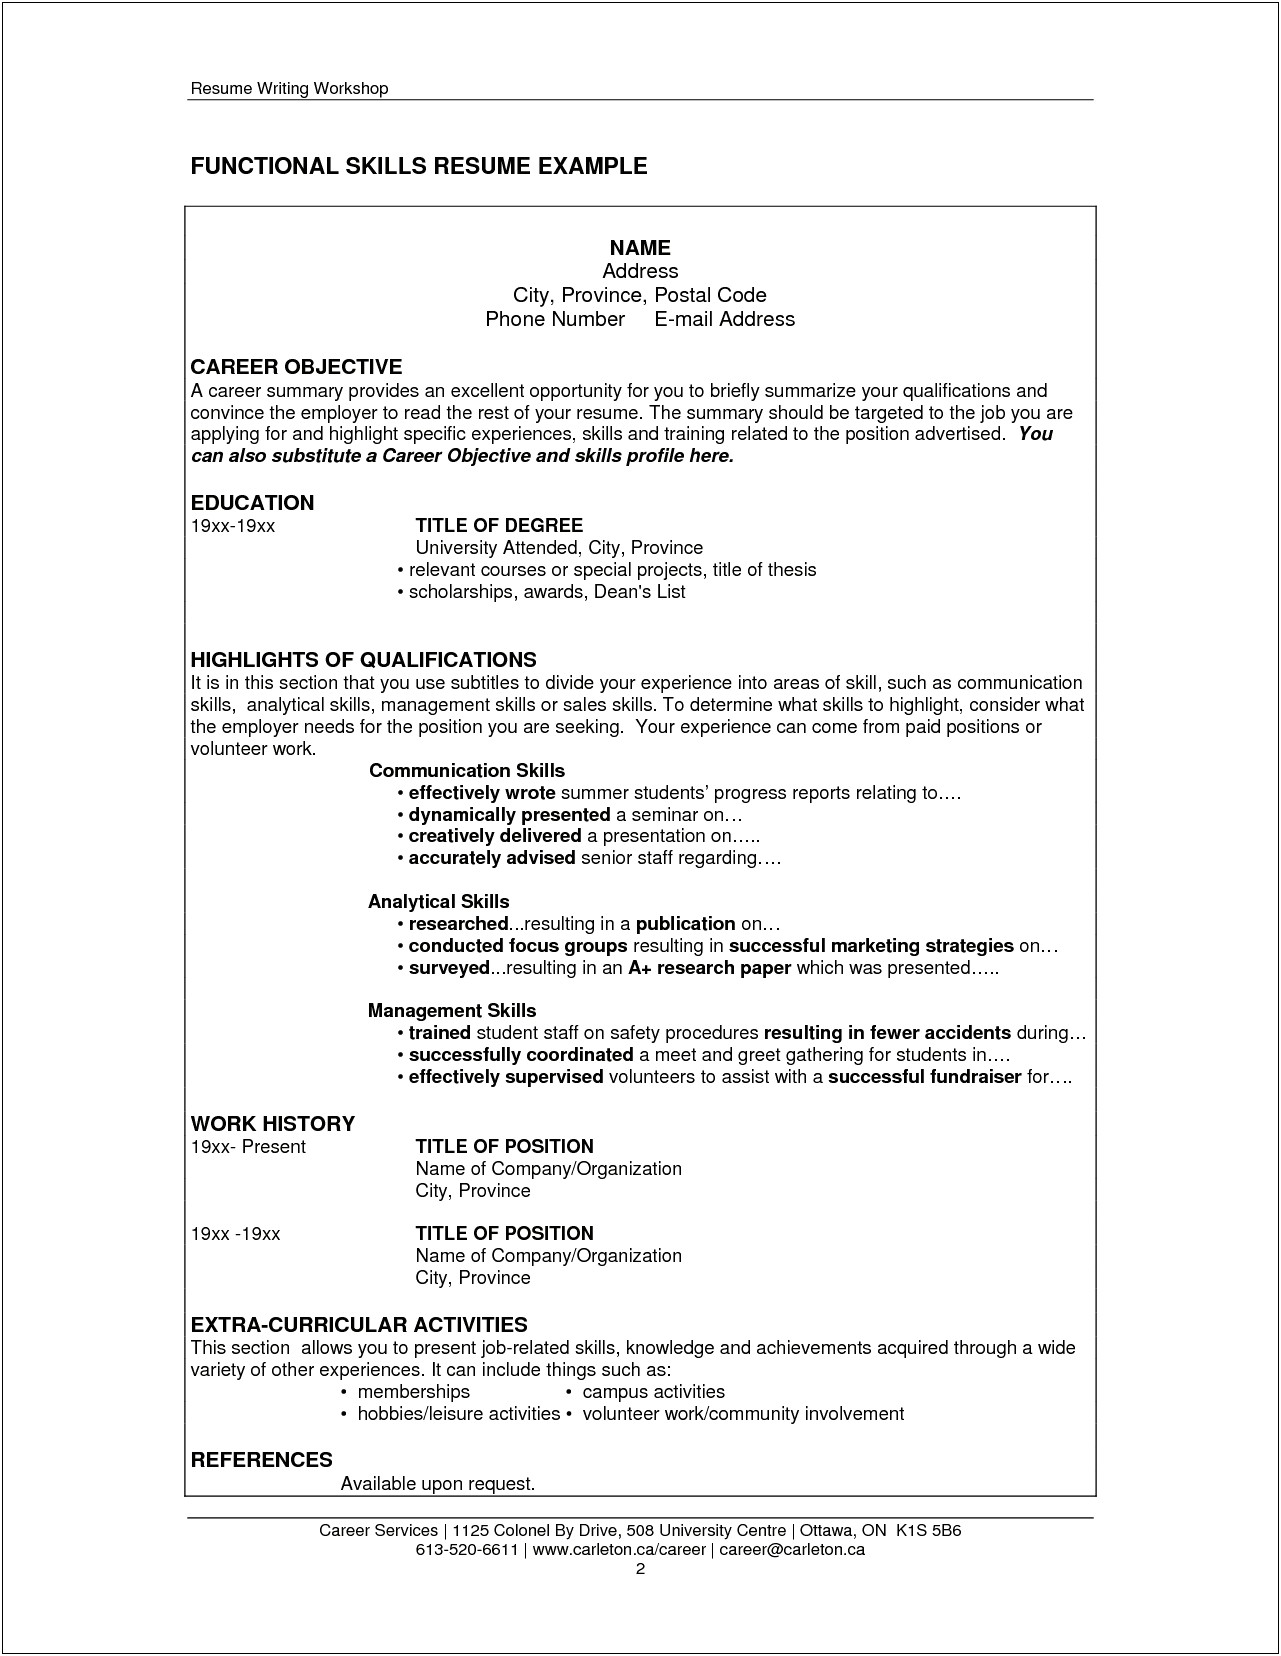 Resume Example With A Profile Section